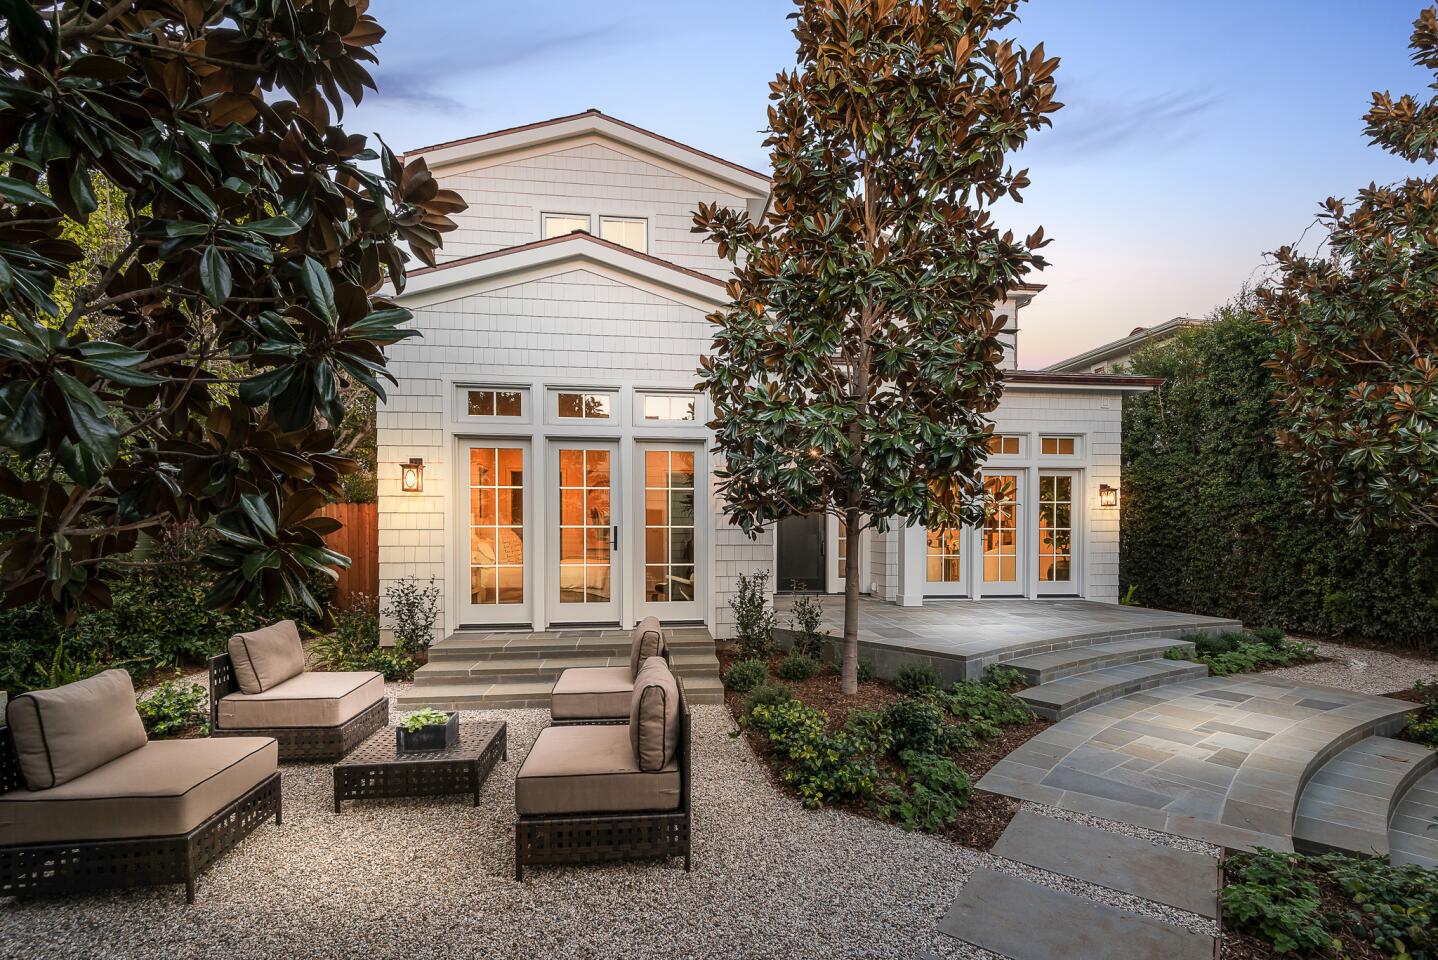 Home of the Day | Brentwood